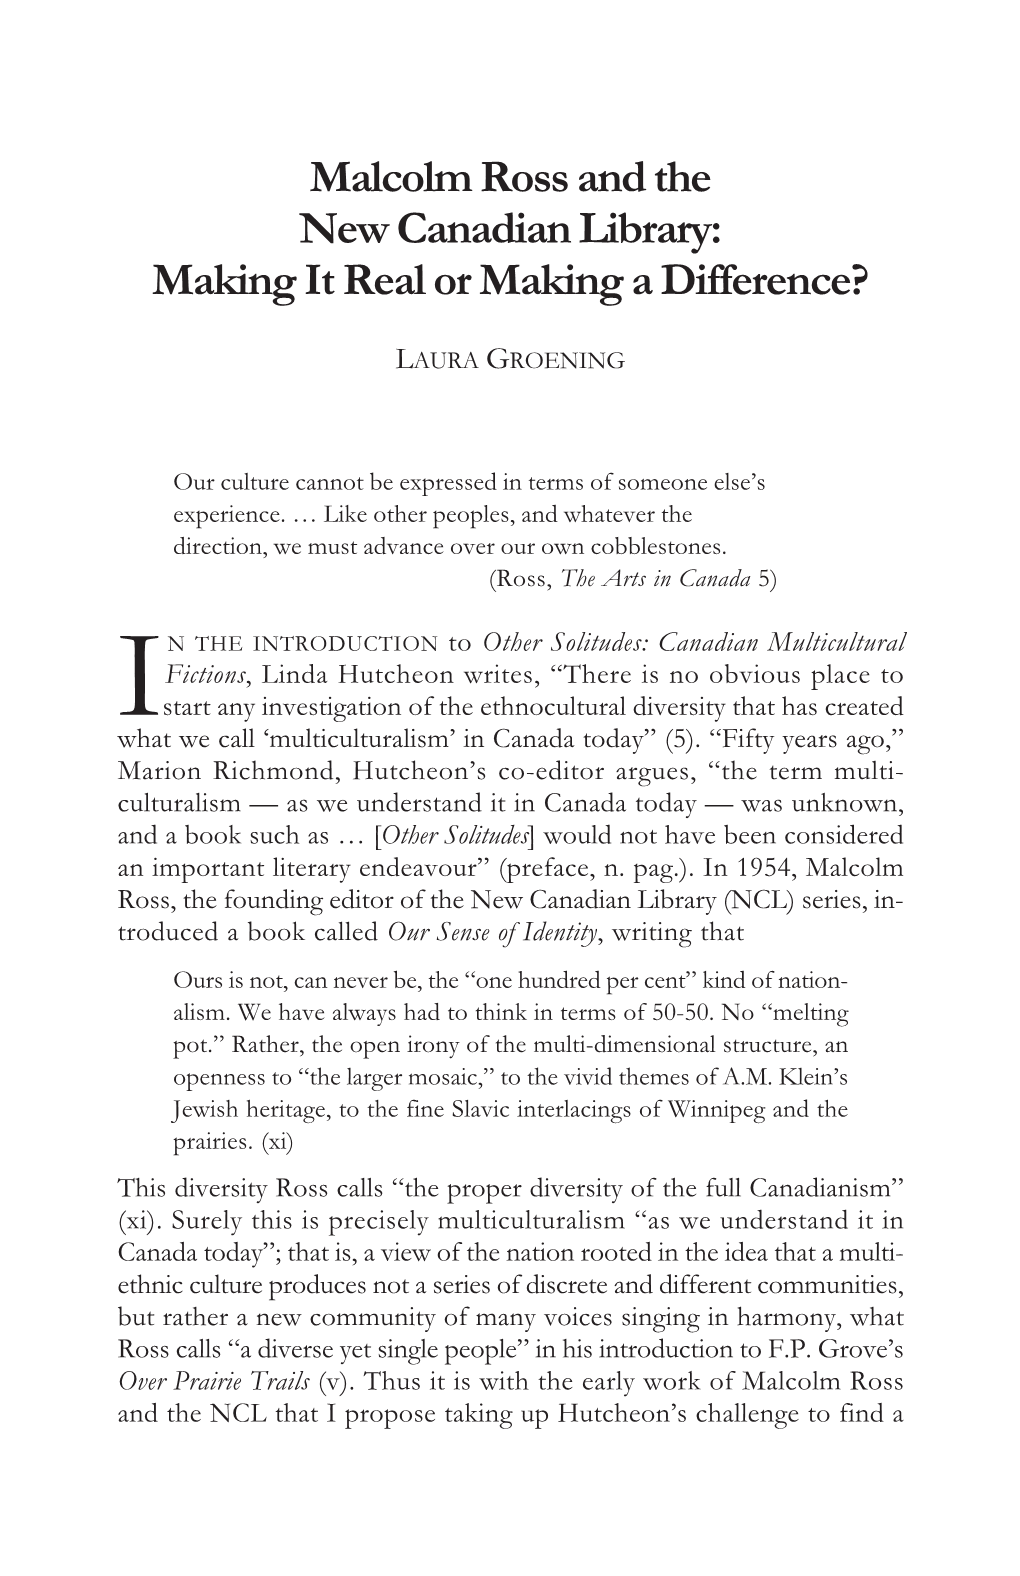 Malcolm Ross and the New Canadian Library: Making It Real Or Making a Difference?